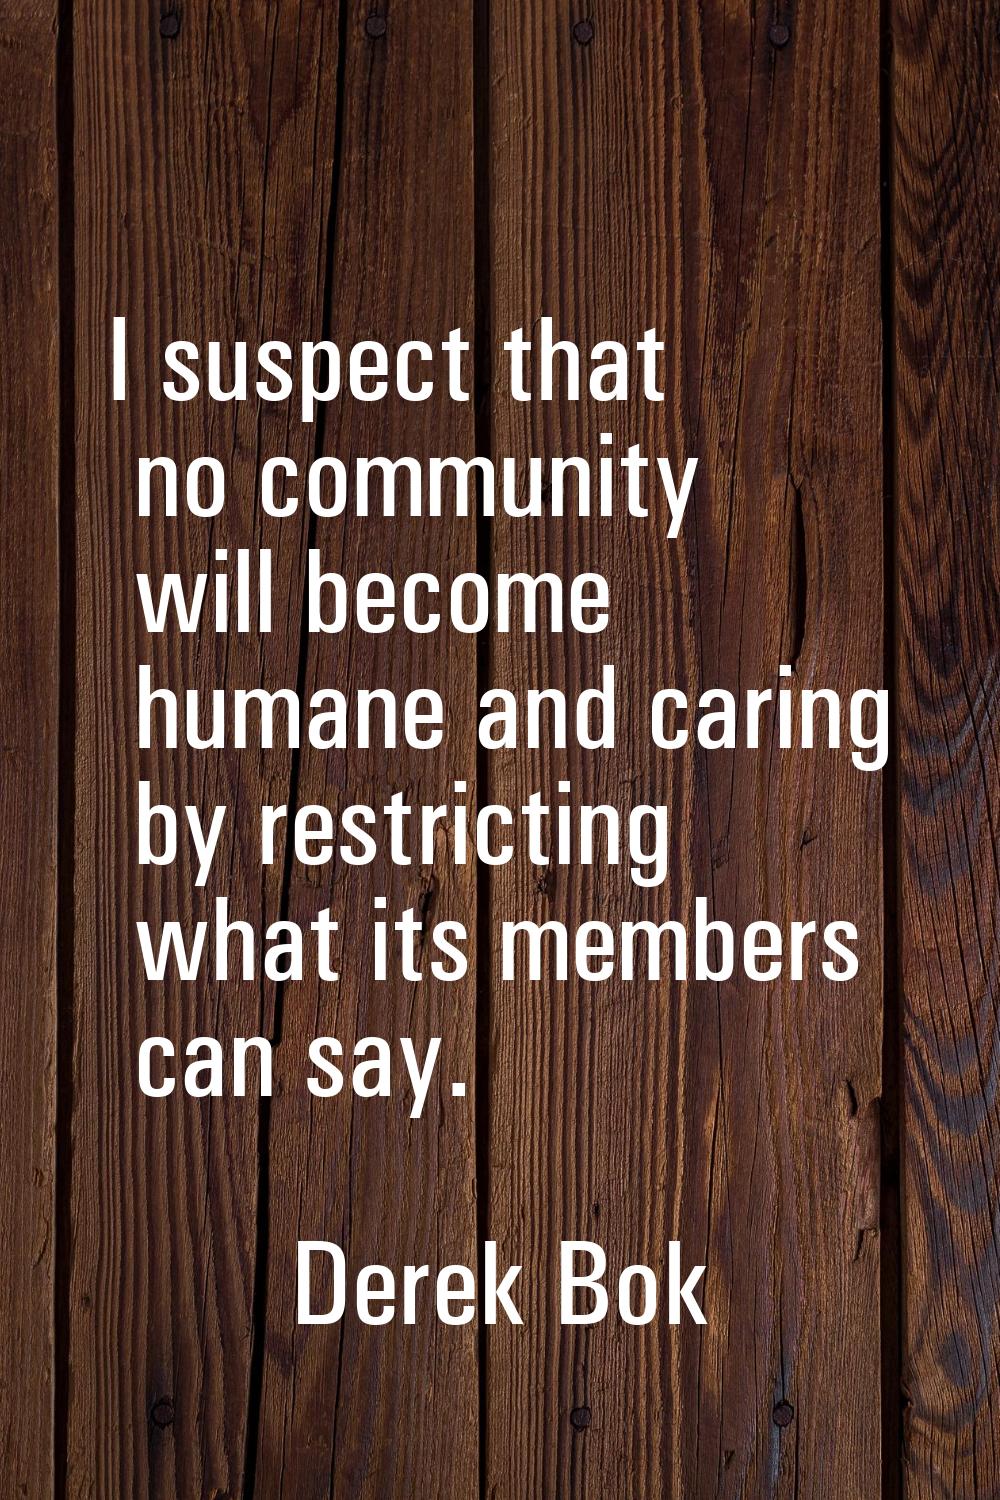 I suspect that no community will become humane and caring by restricting what its members can say.